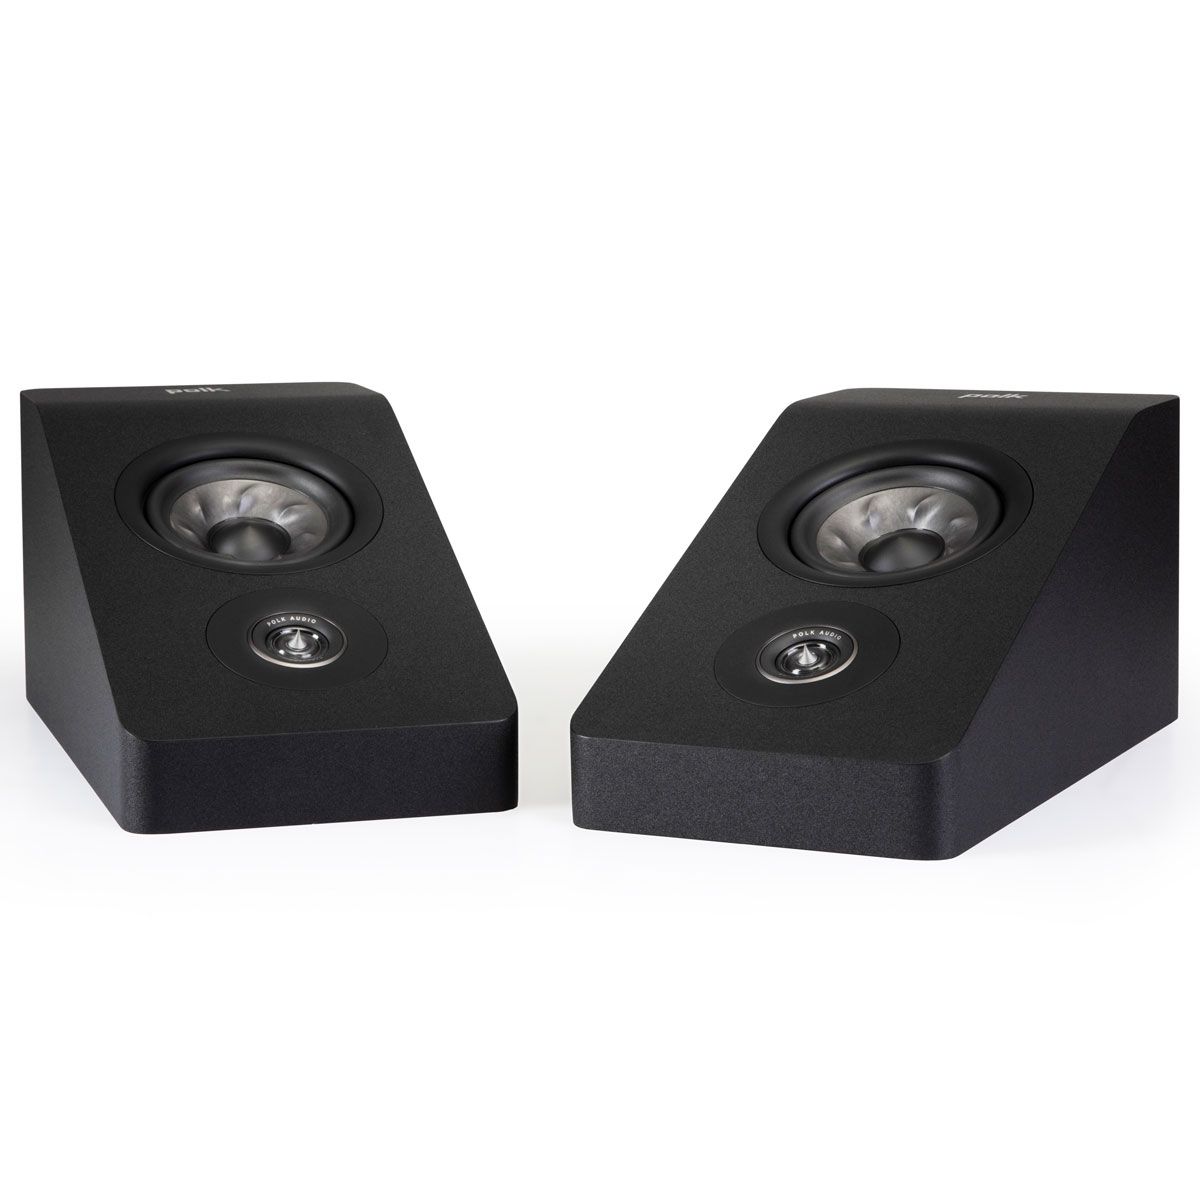 Polk Audio Reserve L900 Height Module Speakers, Black, front angle